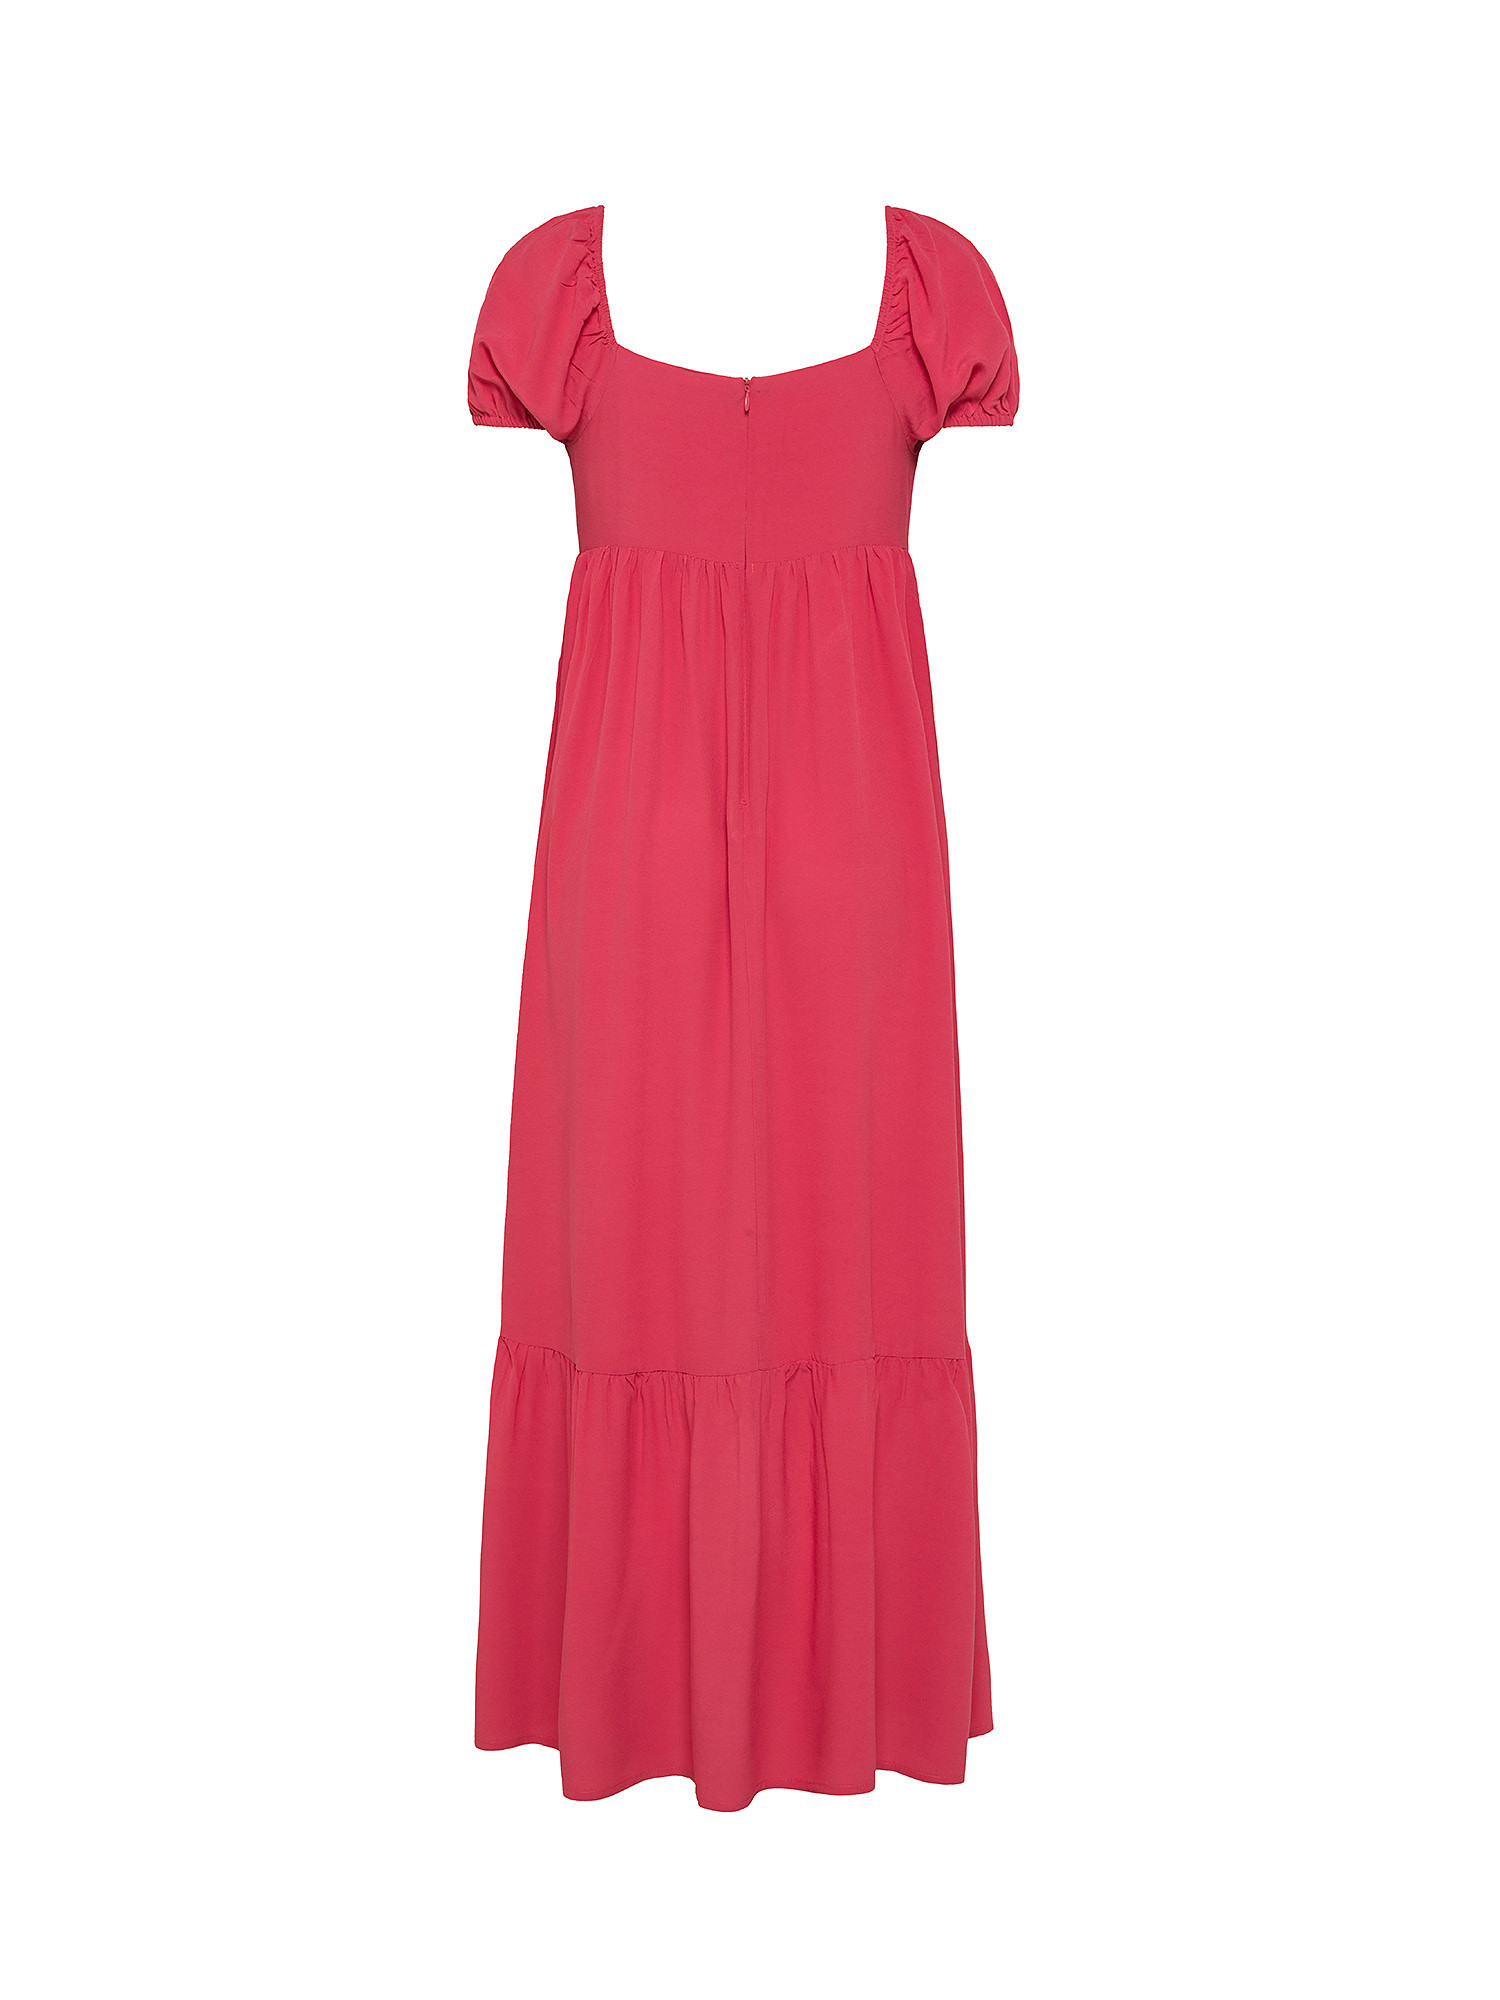 Pepe Jeans - Long flowing dress, Coral Red, large image number 1